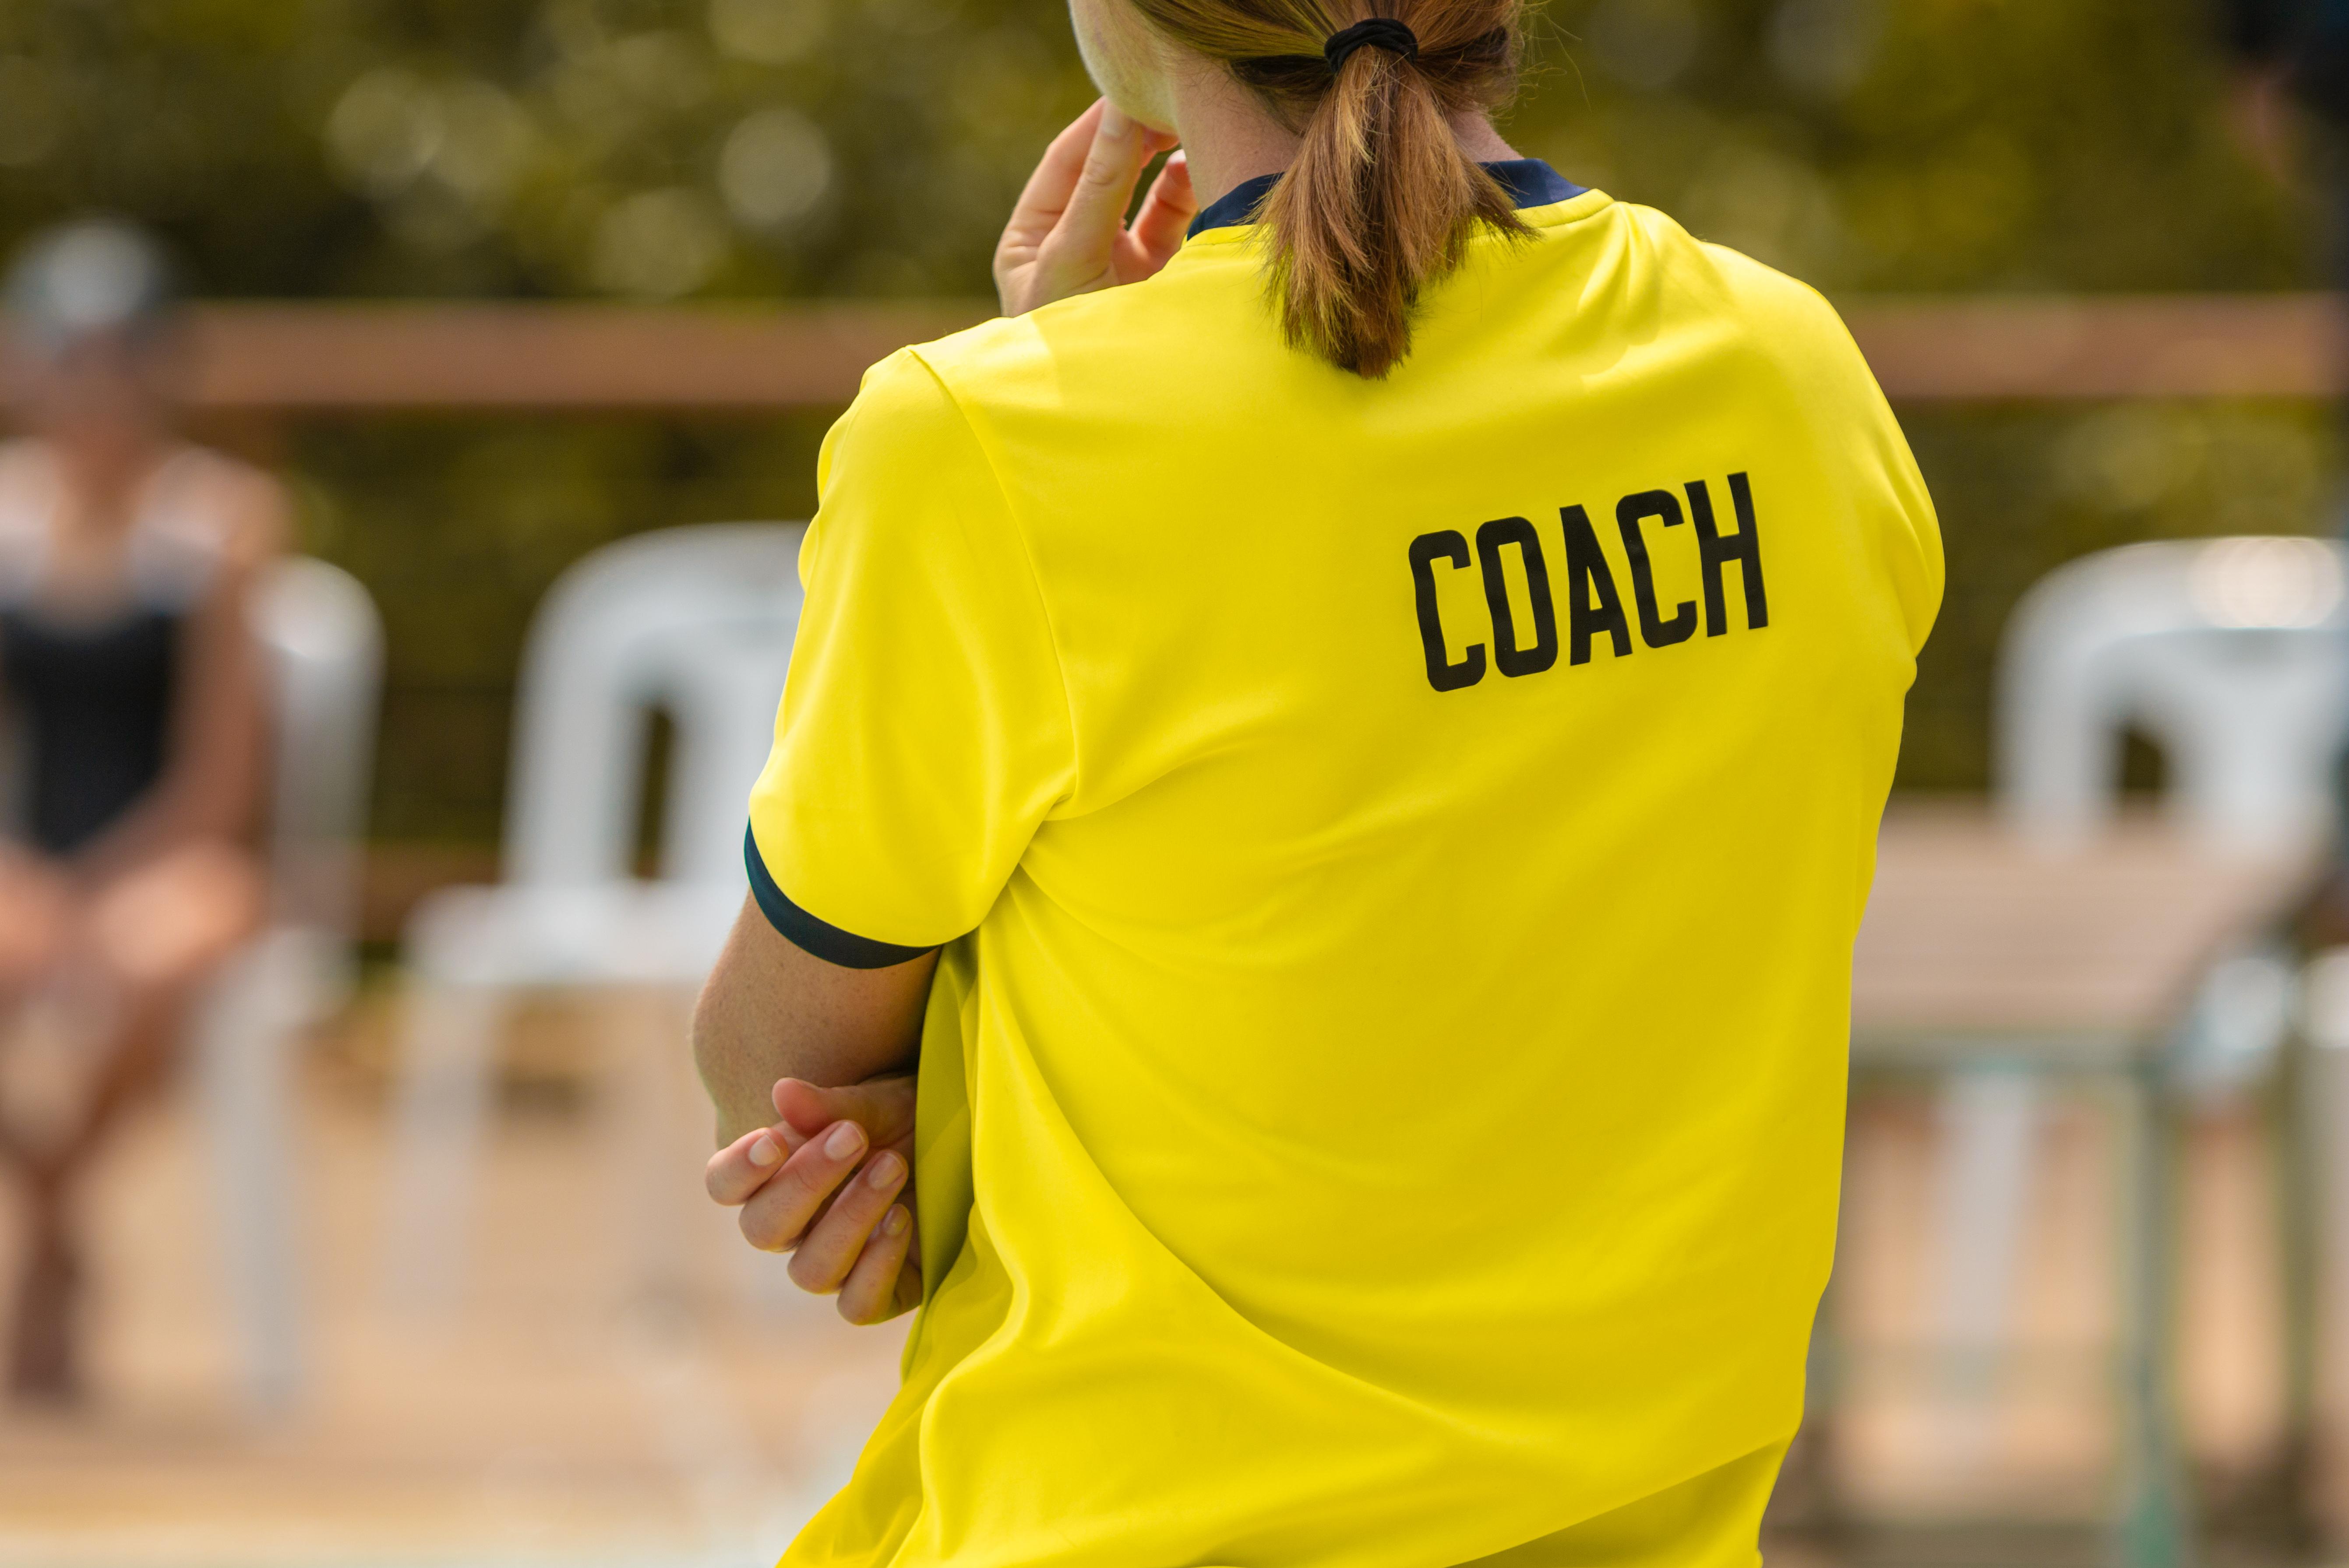 Coach in yellow jersey stands on sideline, background blurred